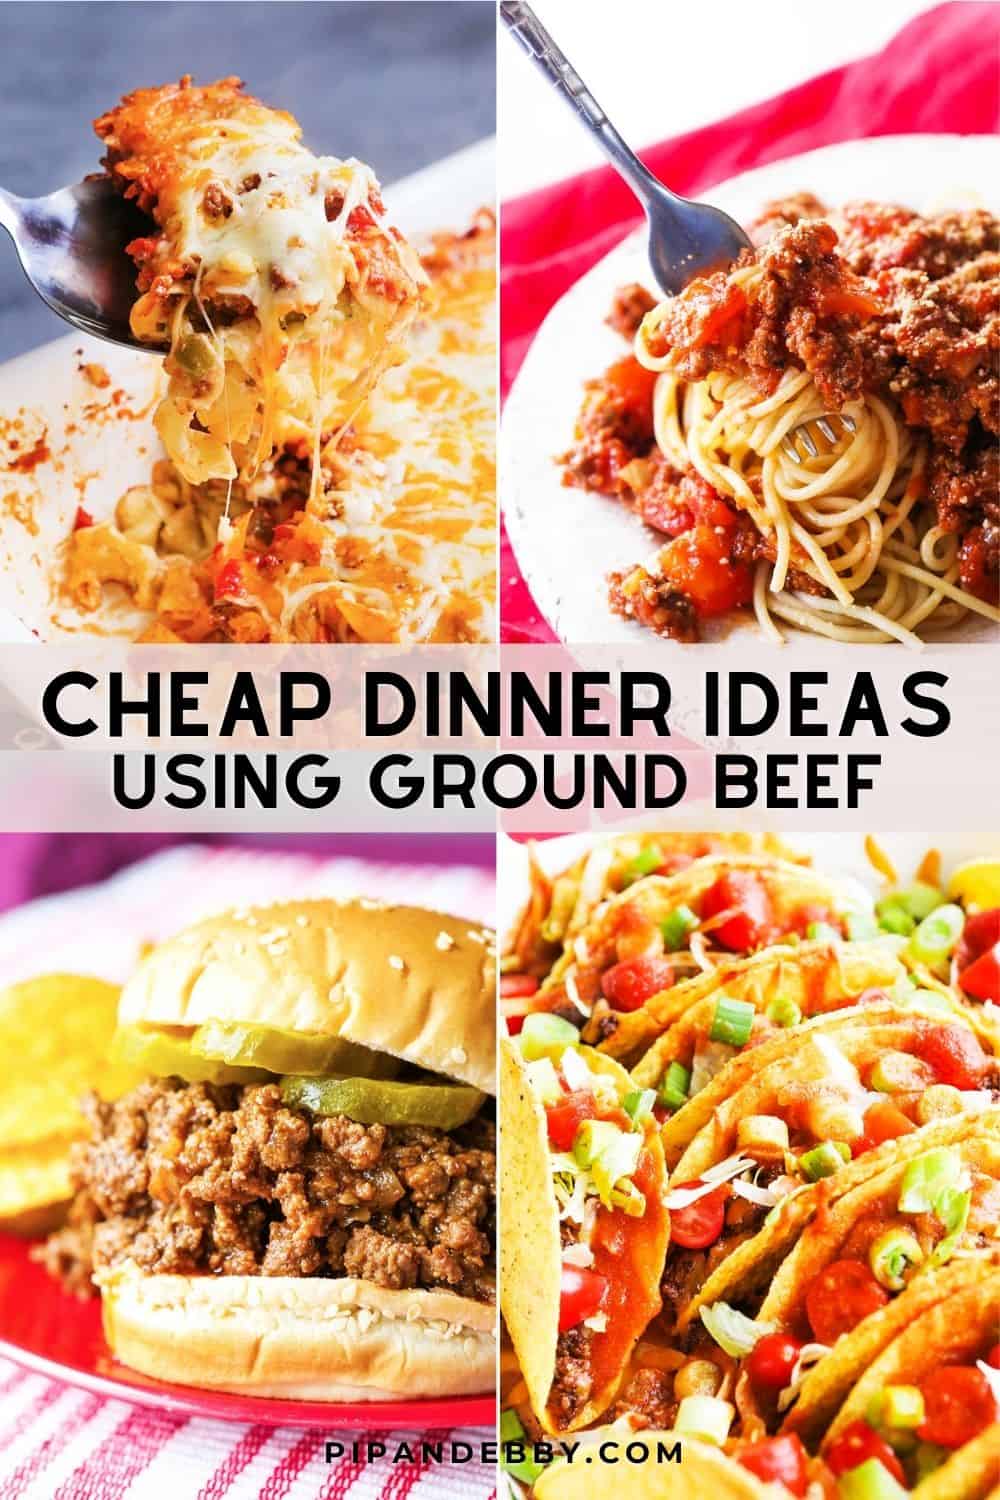 Four ground beef recipes in a single graphic with text overlay reading, "Cheap dinner ideas using ground beef."